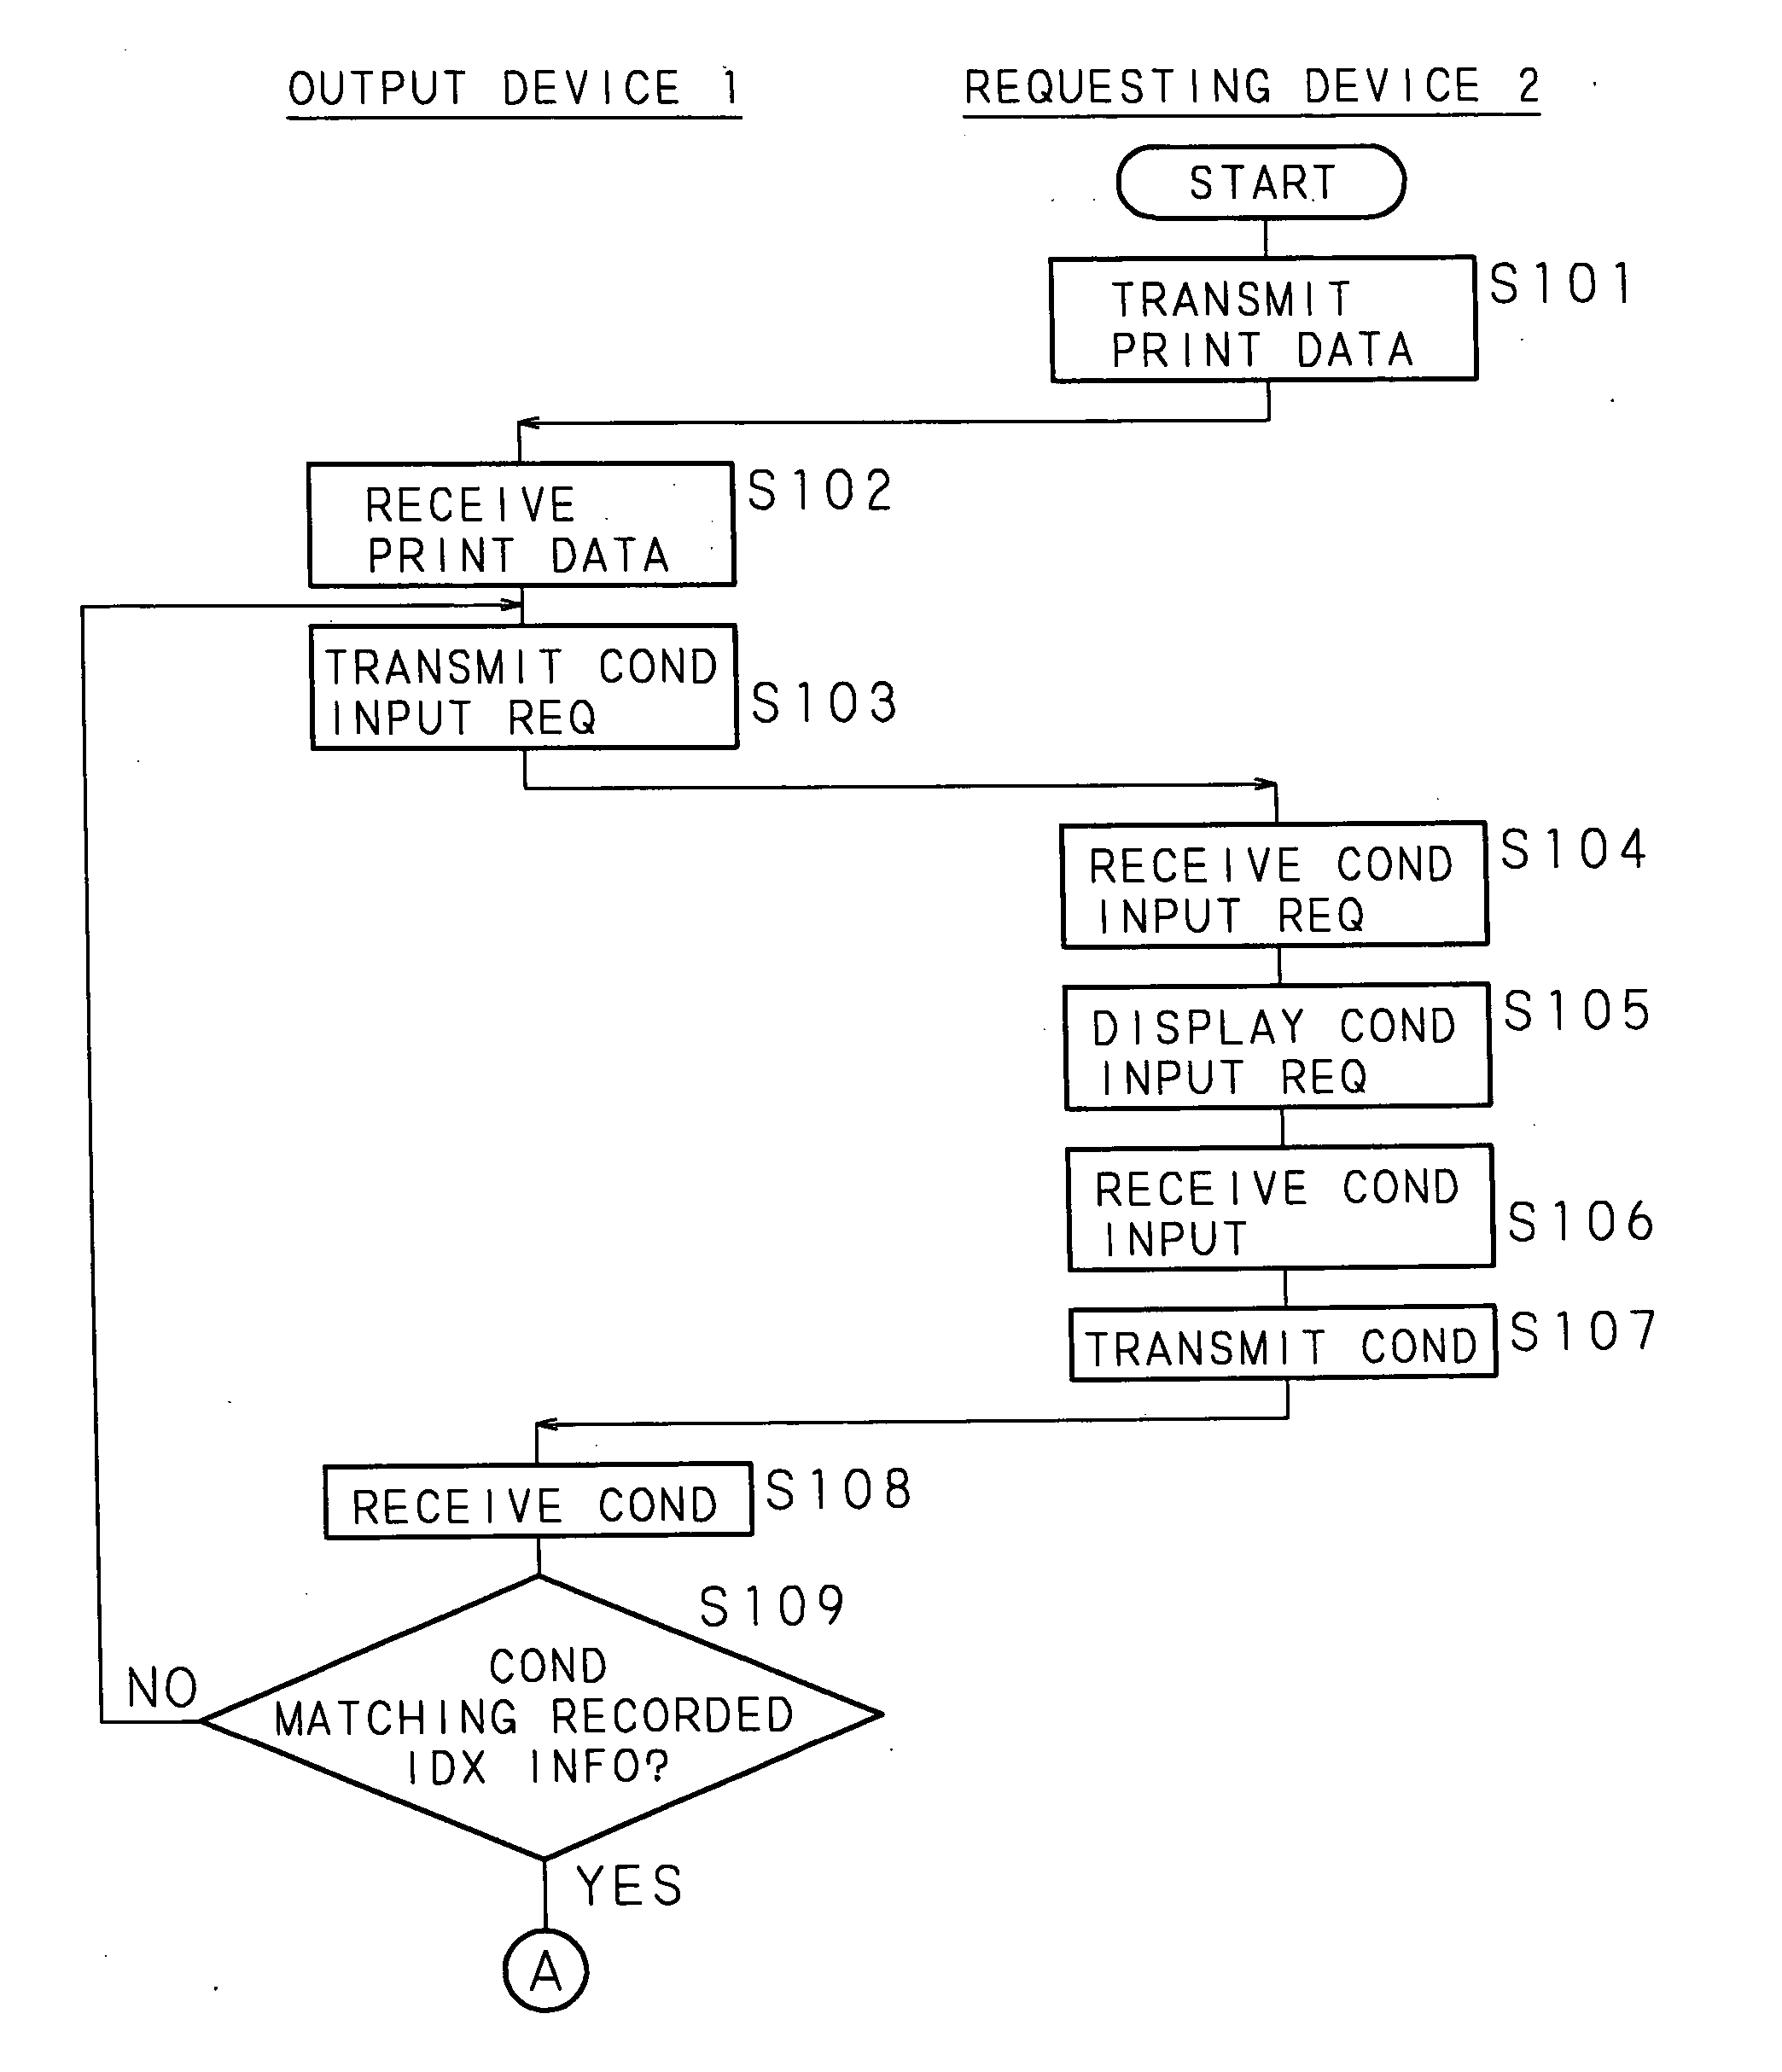 Output system and output device